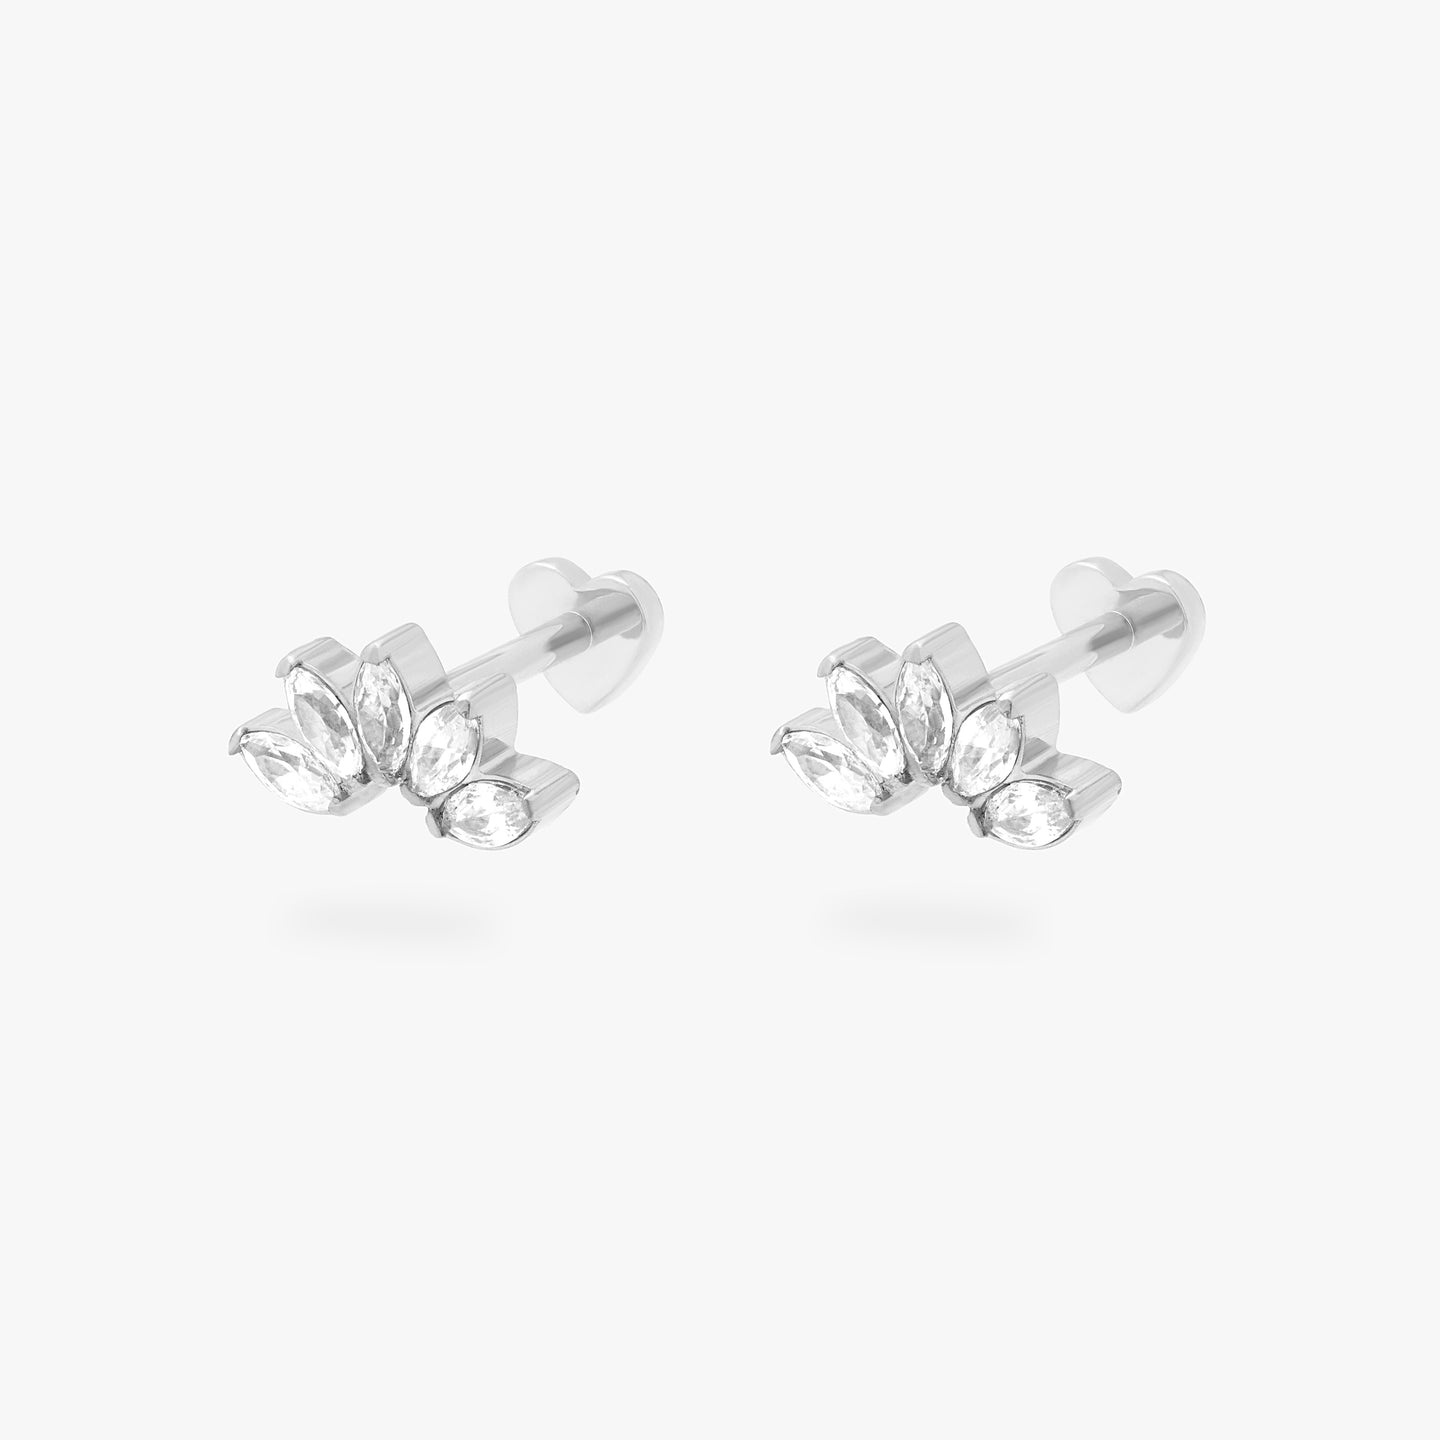 This is an image of a pair of silver/clear crown shaped flatback tops that have 5 marquise shaped CZs and heart-shaped silver flatback posts. [pair] color:null|silver/clear